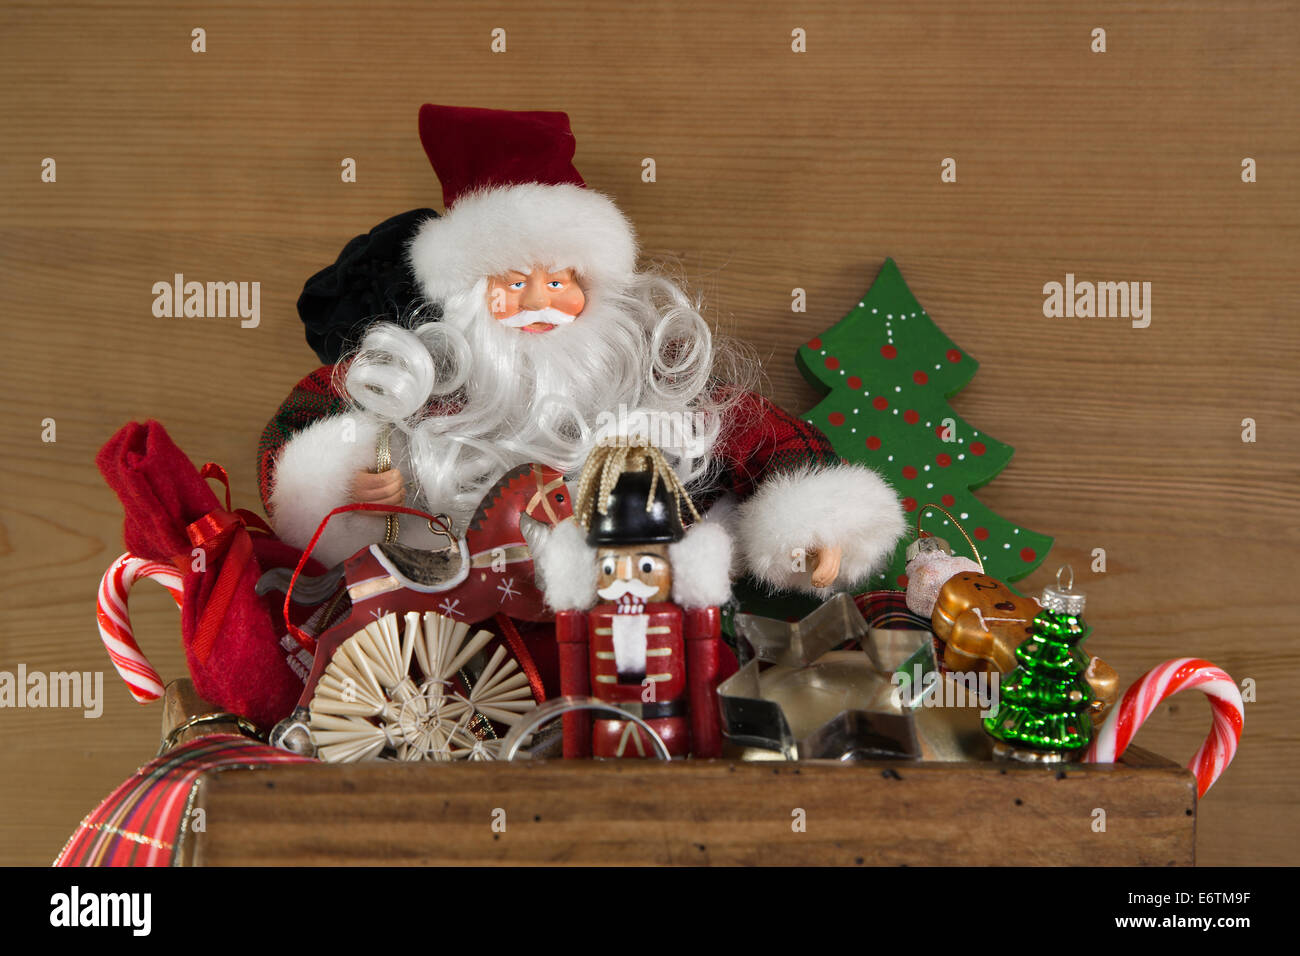 Classic christmas decoration with santa in red, white and green colors. Stock Photo